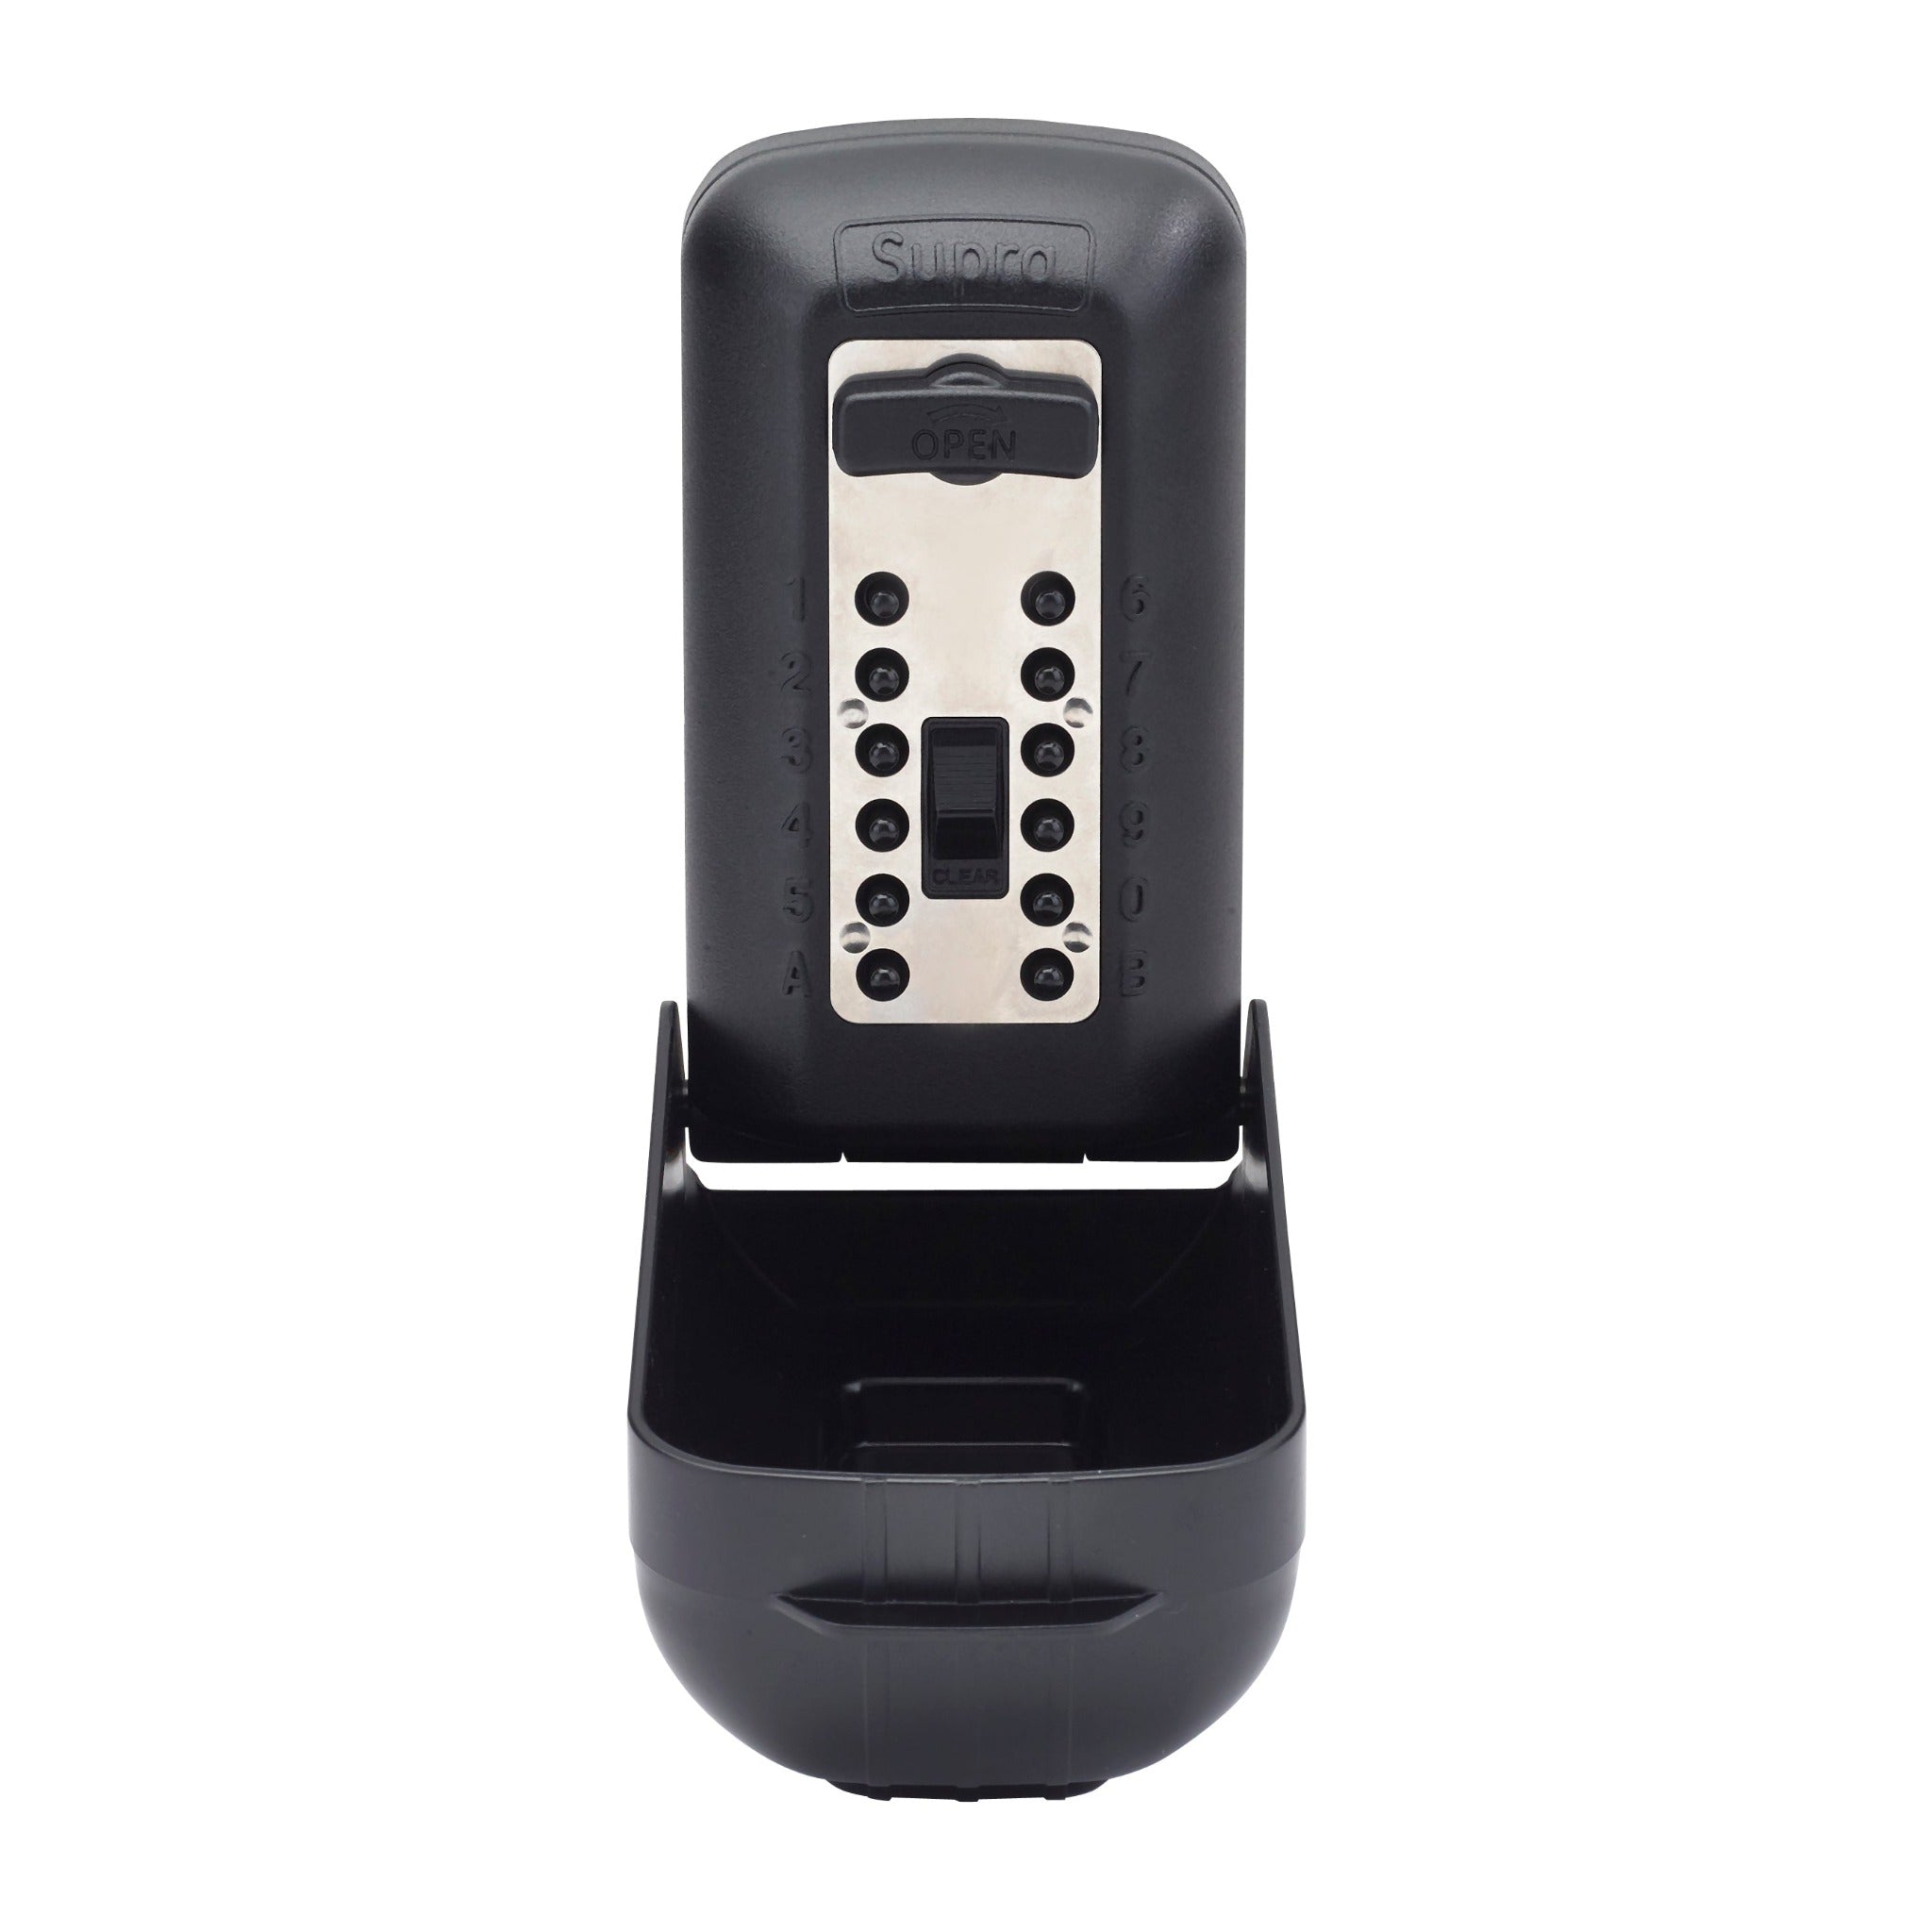 Black police preferred Supra P500 pro key safe with weather cover attached